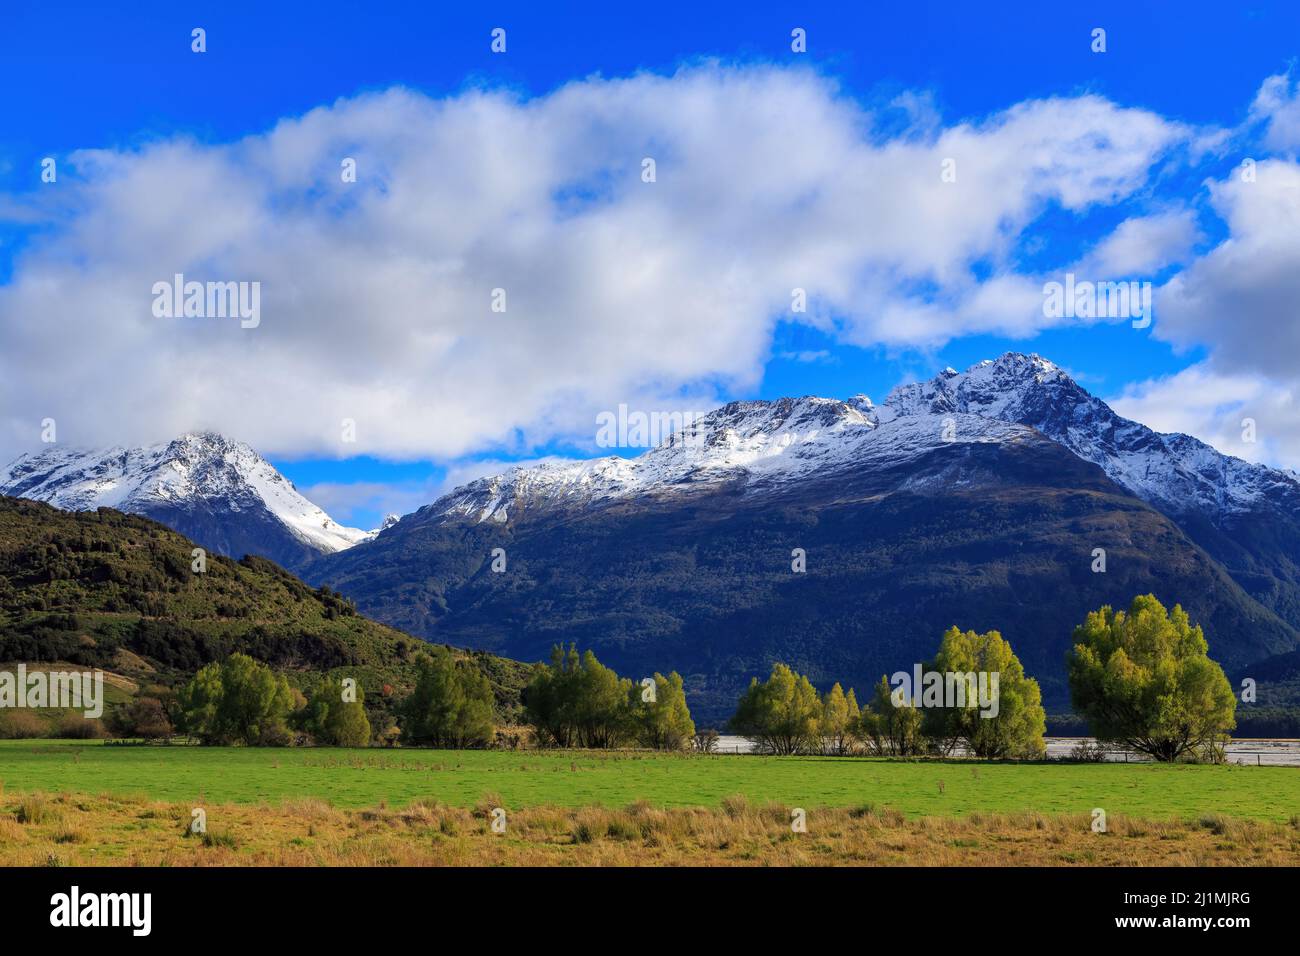 The snow-capped Humboldt Mountains, part of New Zealand's Southern Alps, seen from 'Paradise' a rural locale north of Glenorchy Stock Photo